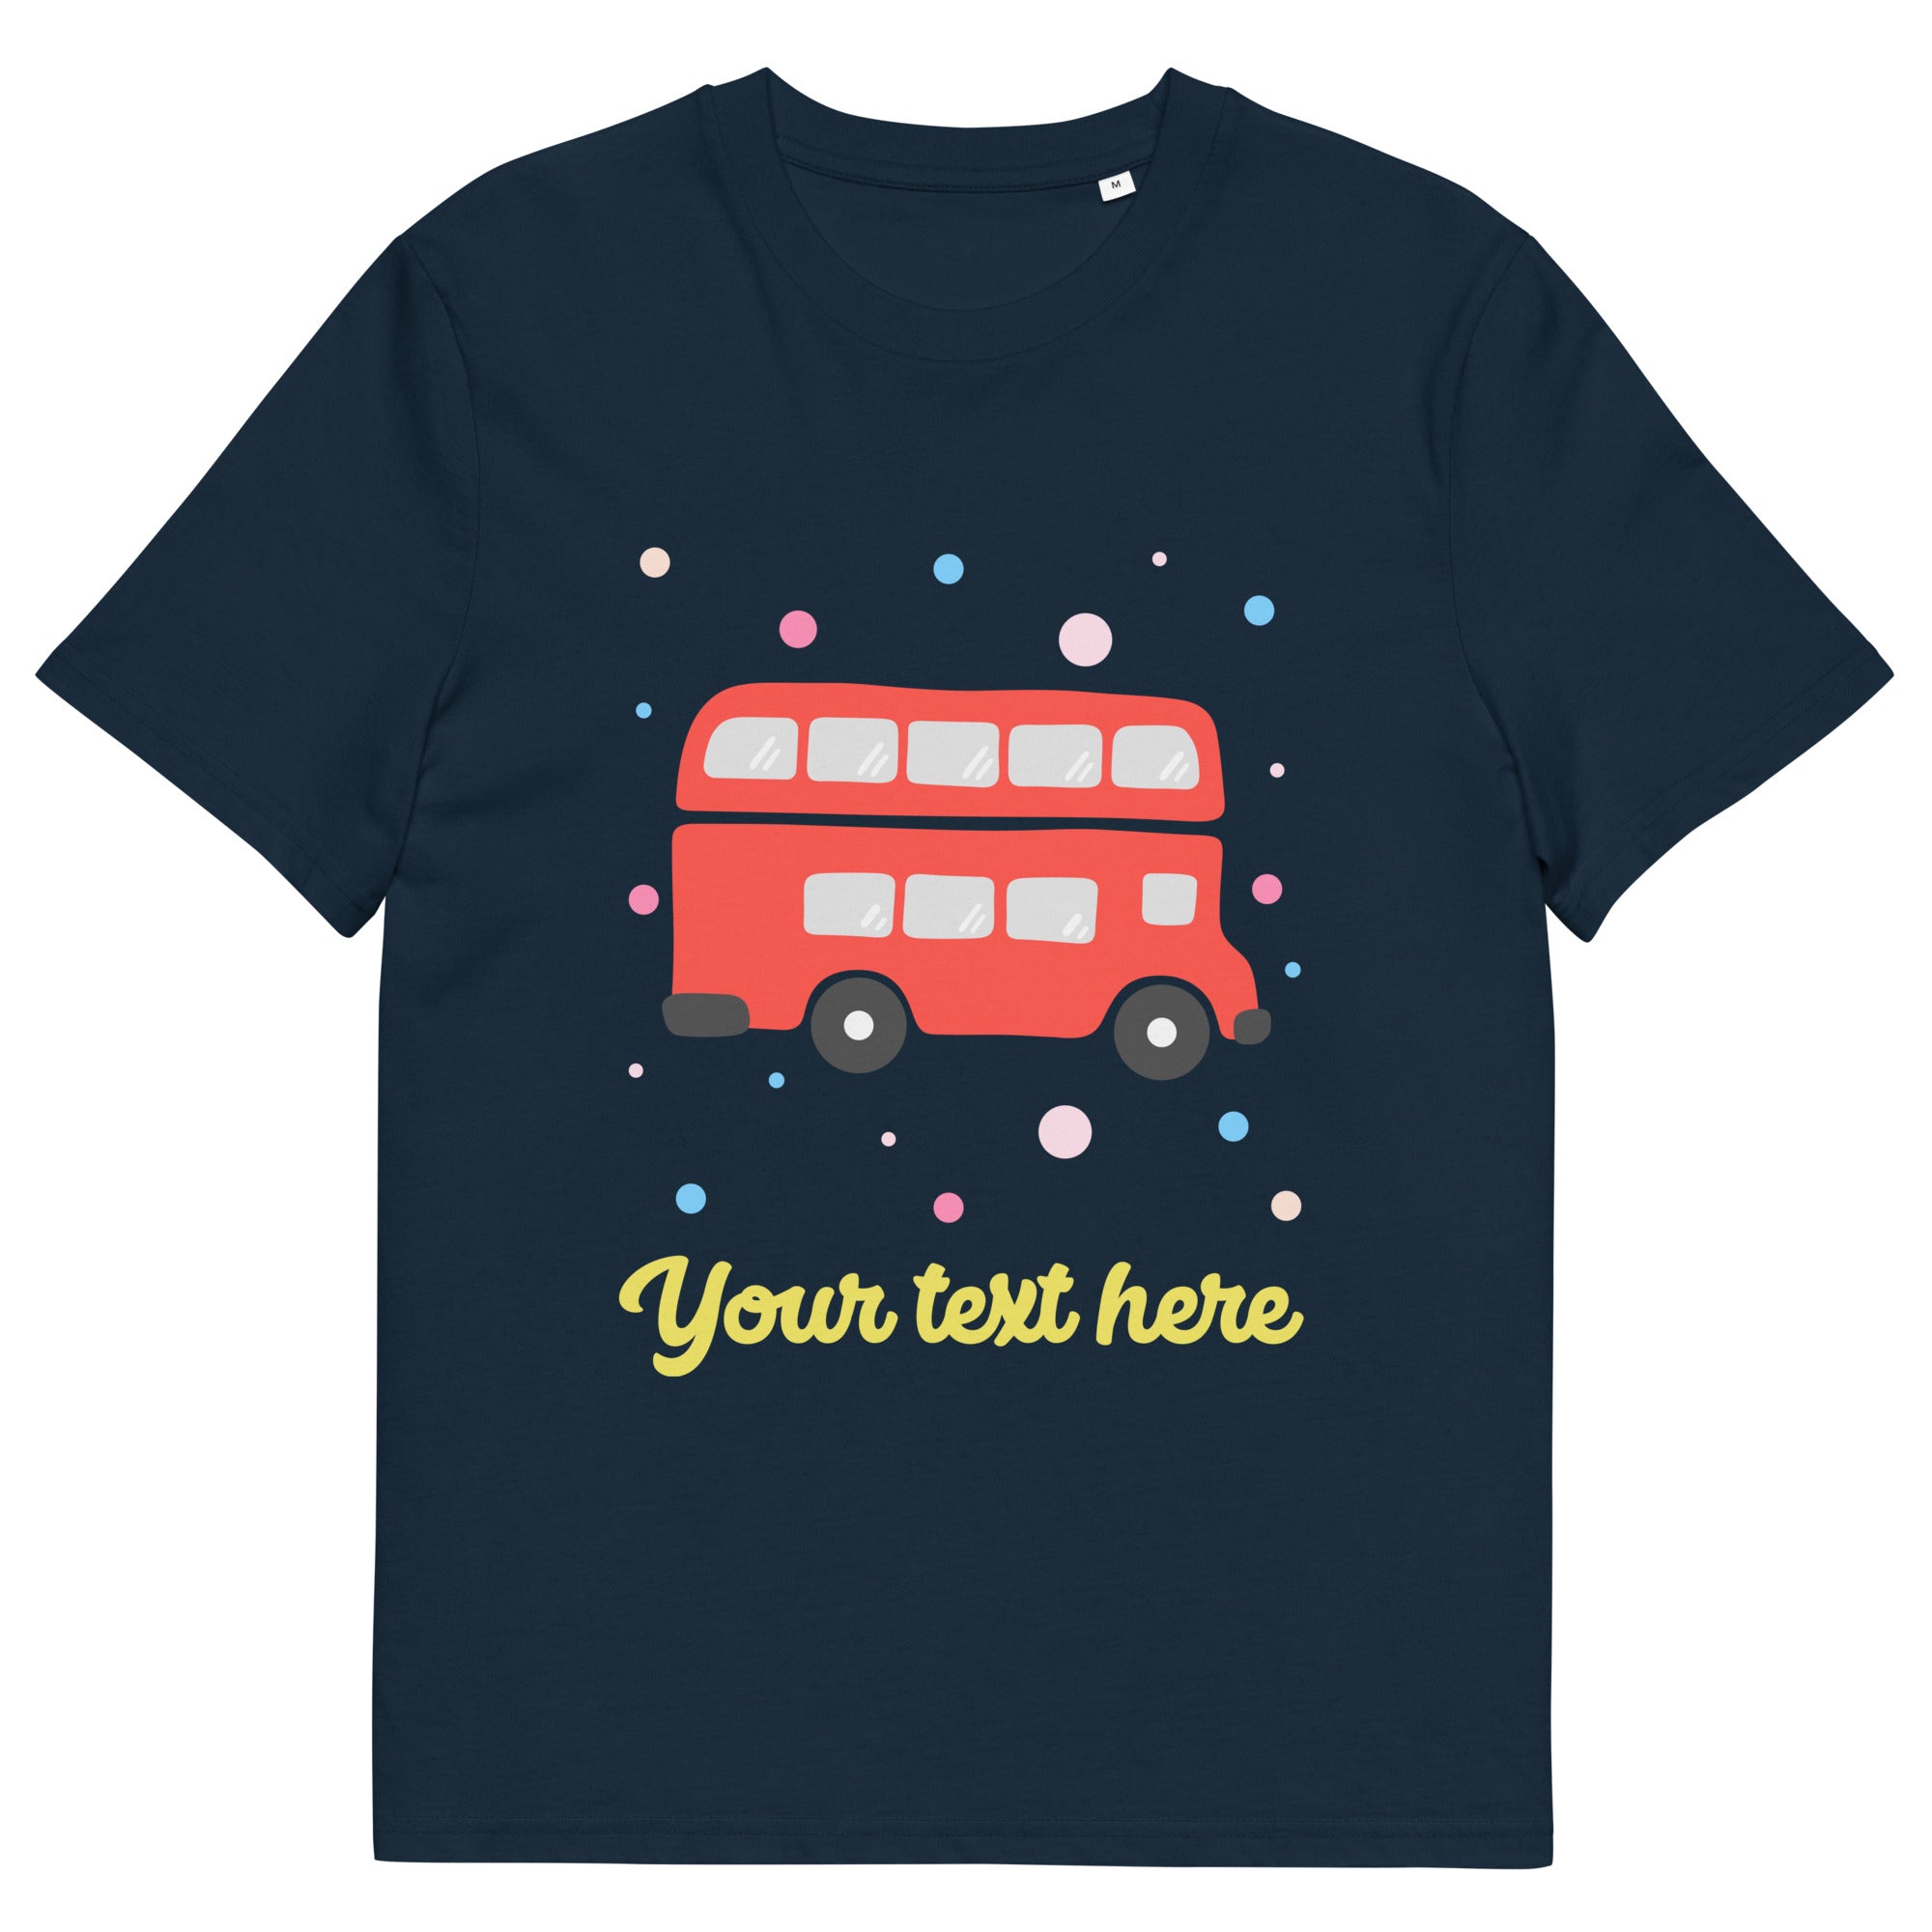 Personalised Custom Text - Organic Cotton Adults Unisex T-Shirt - London Doodles - Red Bus - Navy